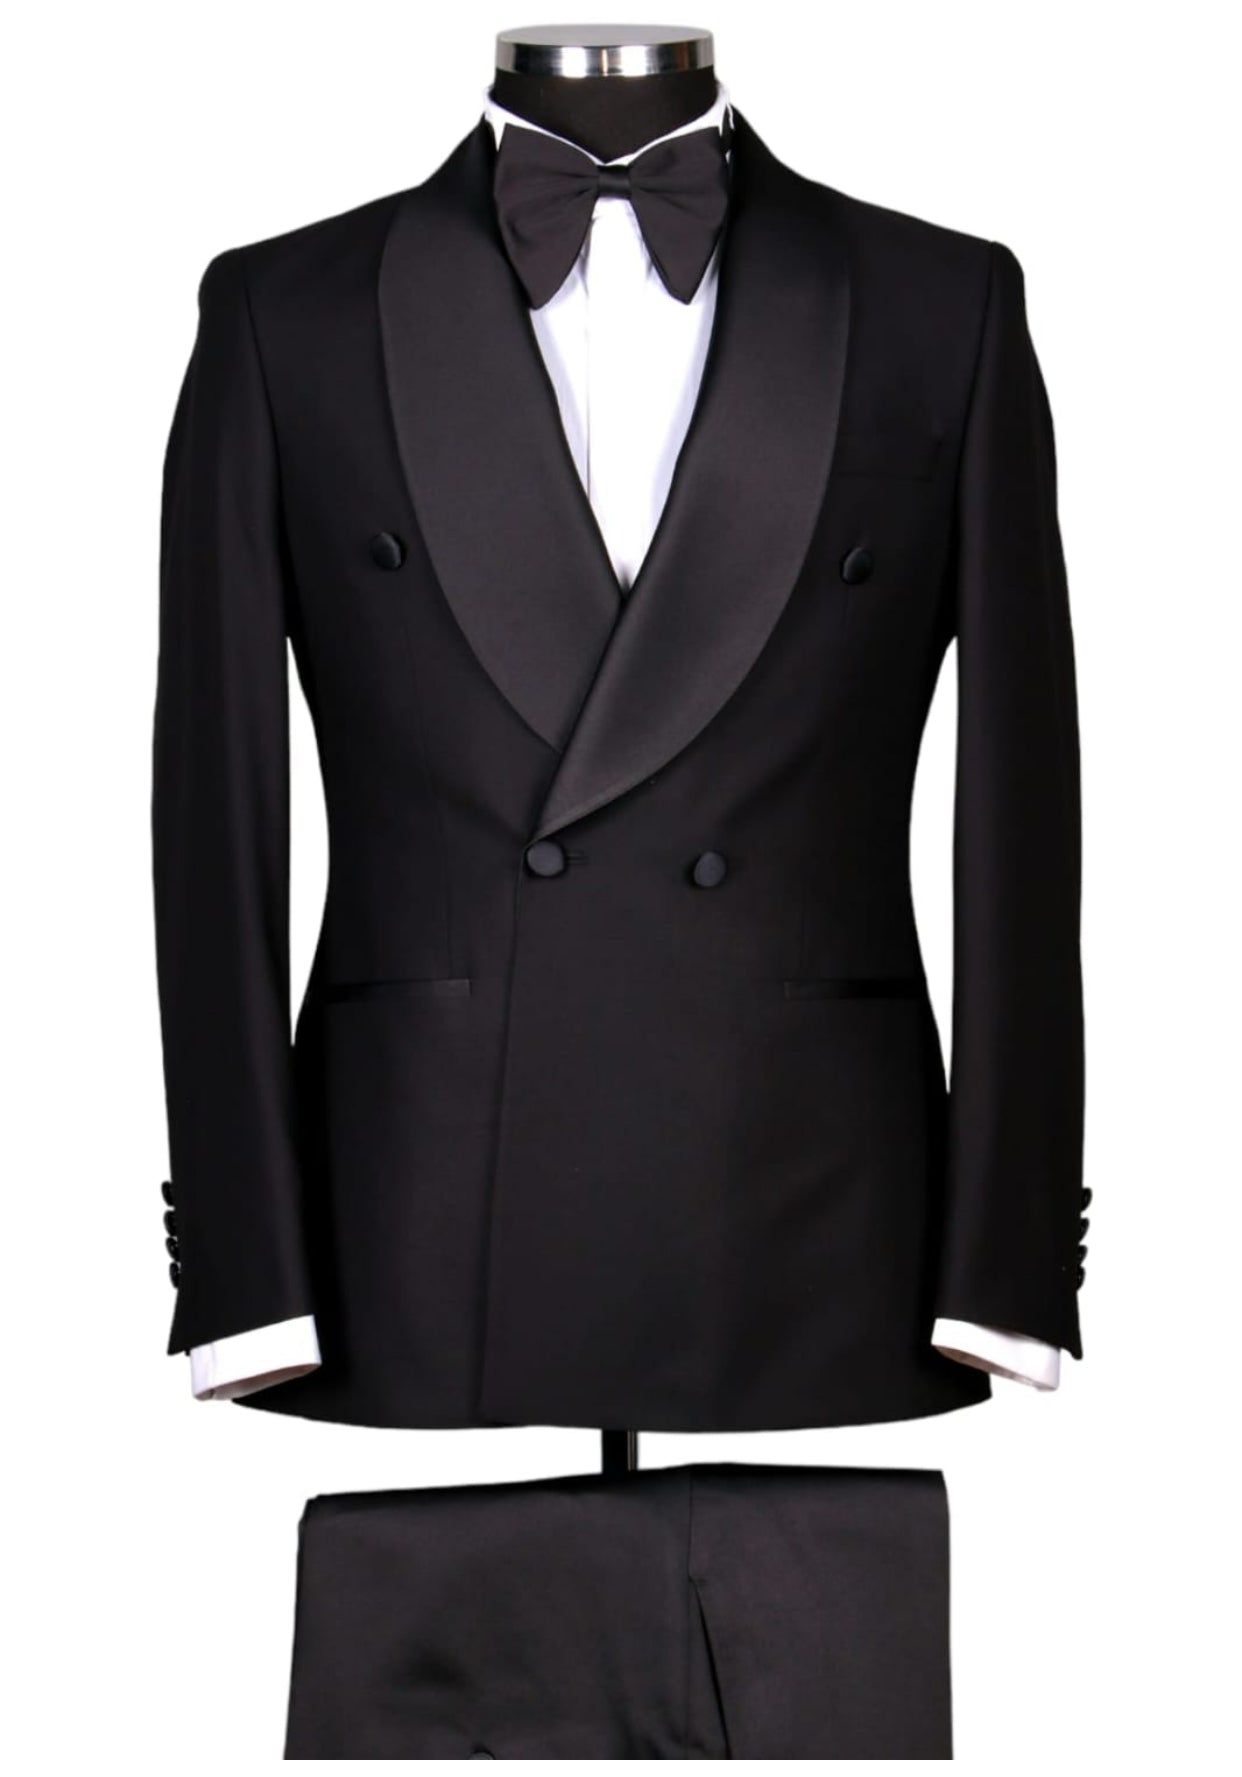 BLACK DOUBLE-BREASTED TUXEDO SLIM FIT THREE-PIECE SUIT